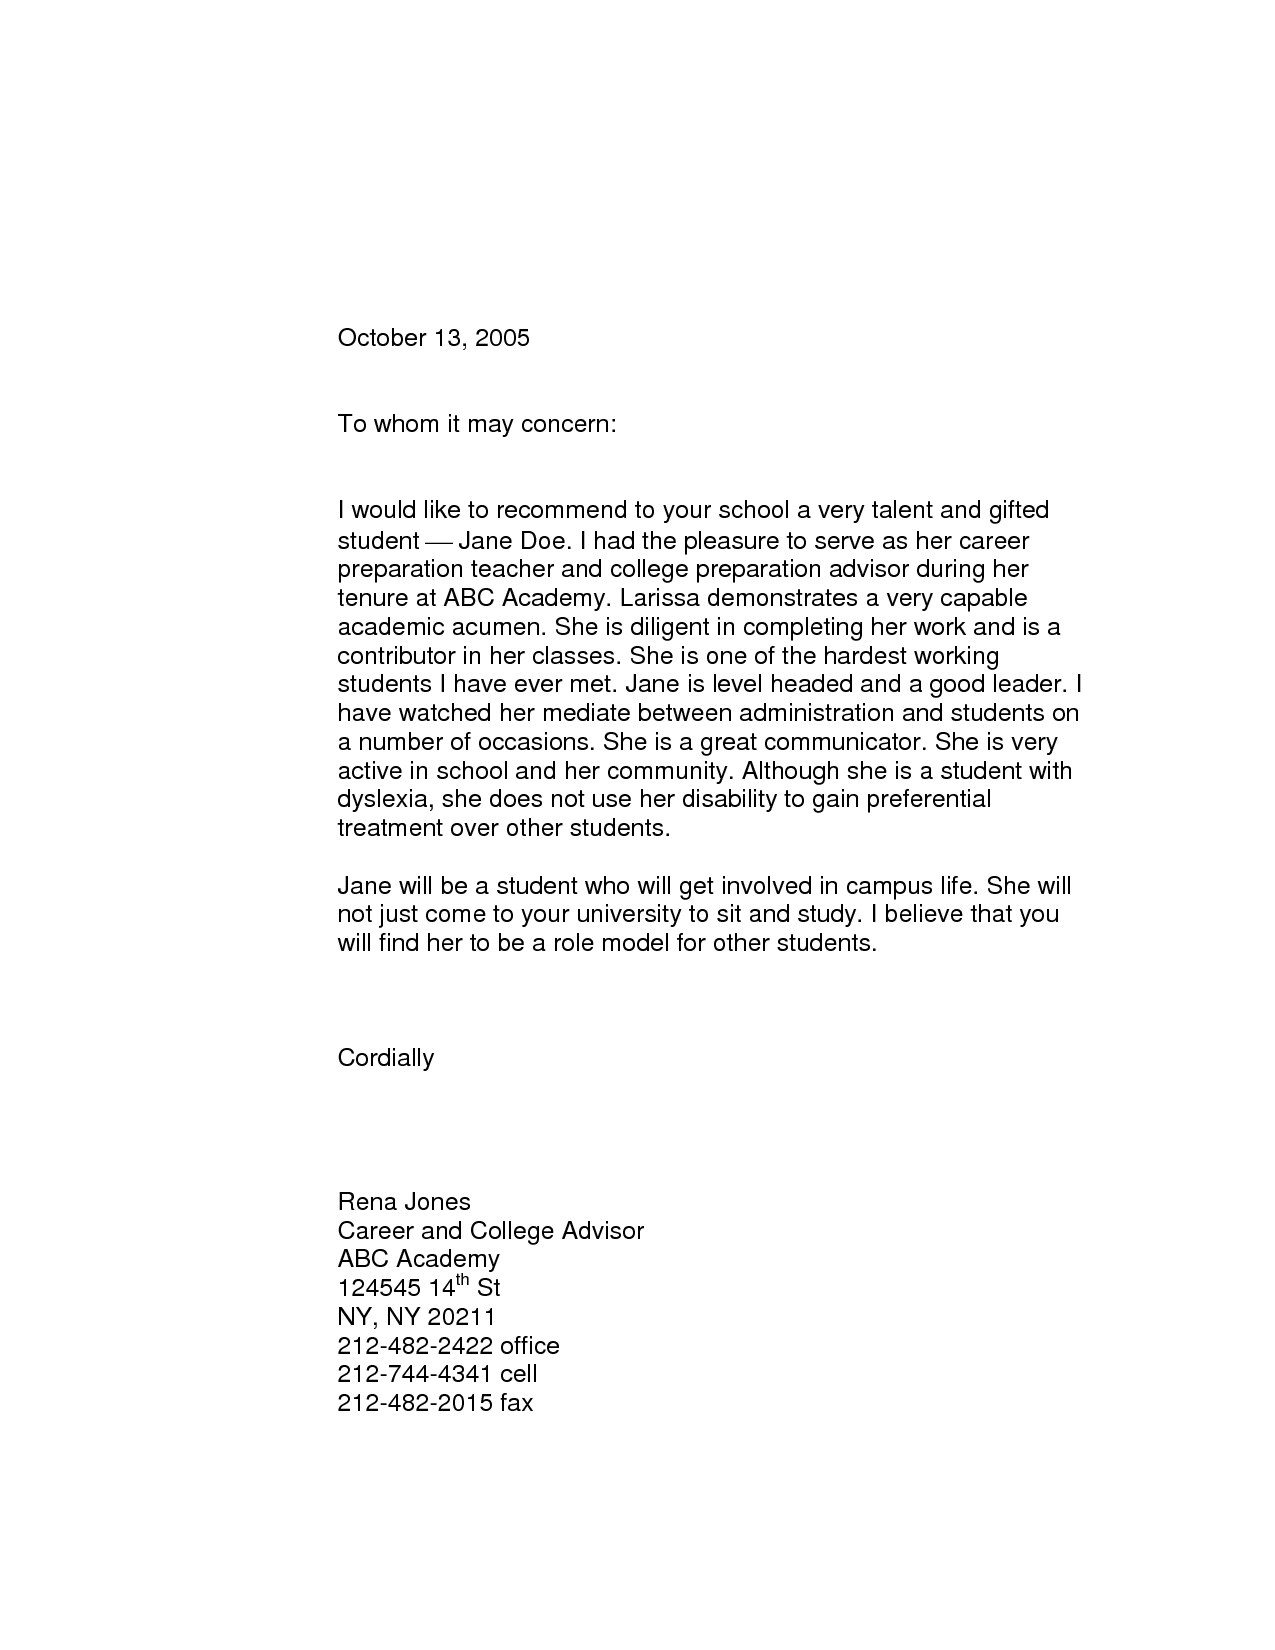 Sample Recommendation Letter For Job from chinaschooling.com